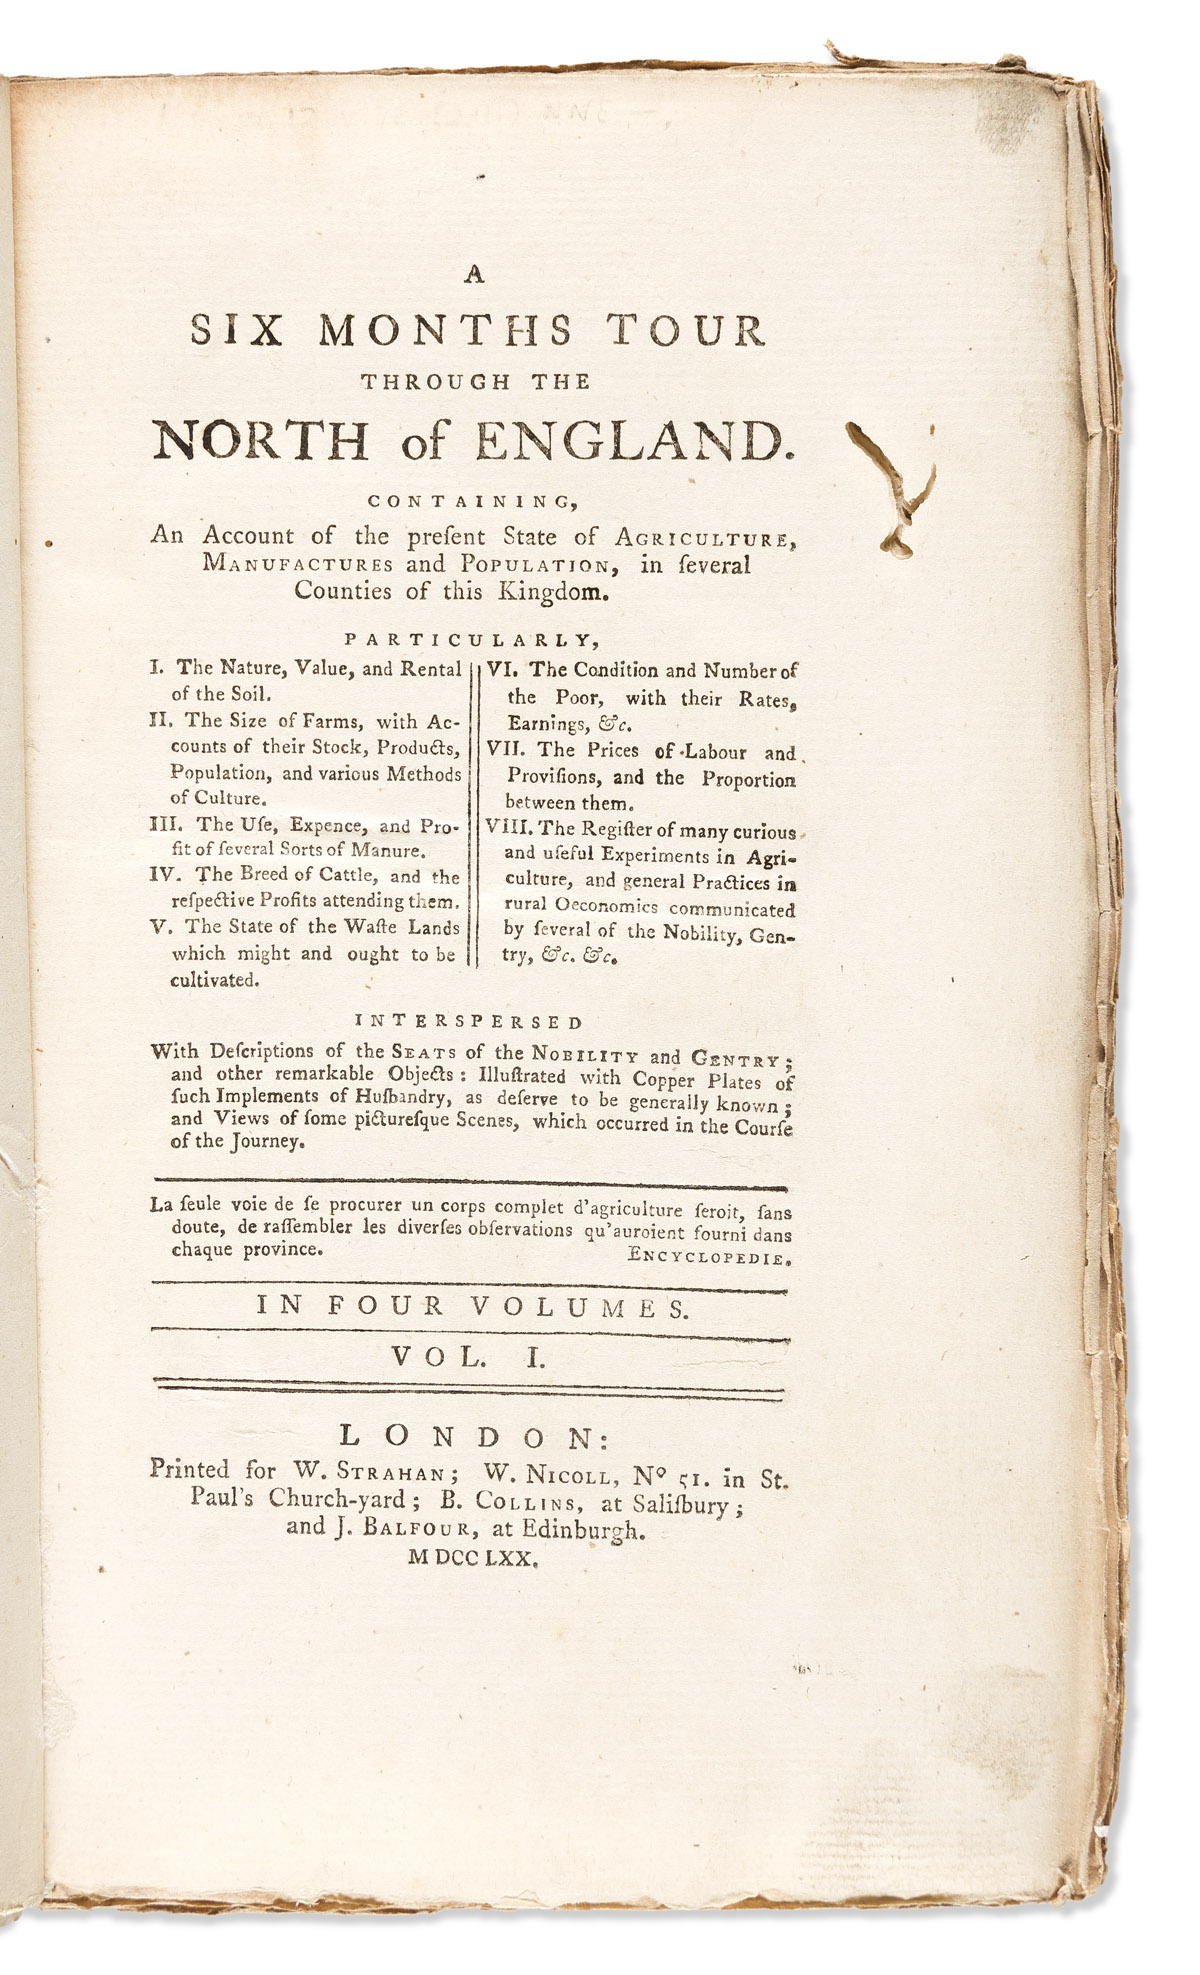 [Economics] Young, Arthur (1741-1820) A Six Months Tour through the North of England.